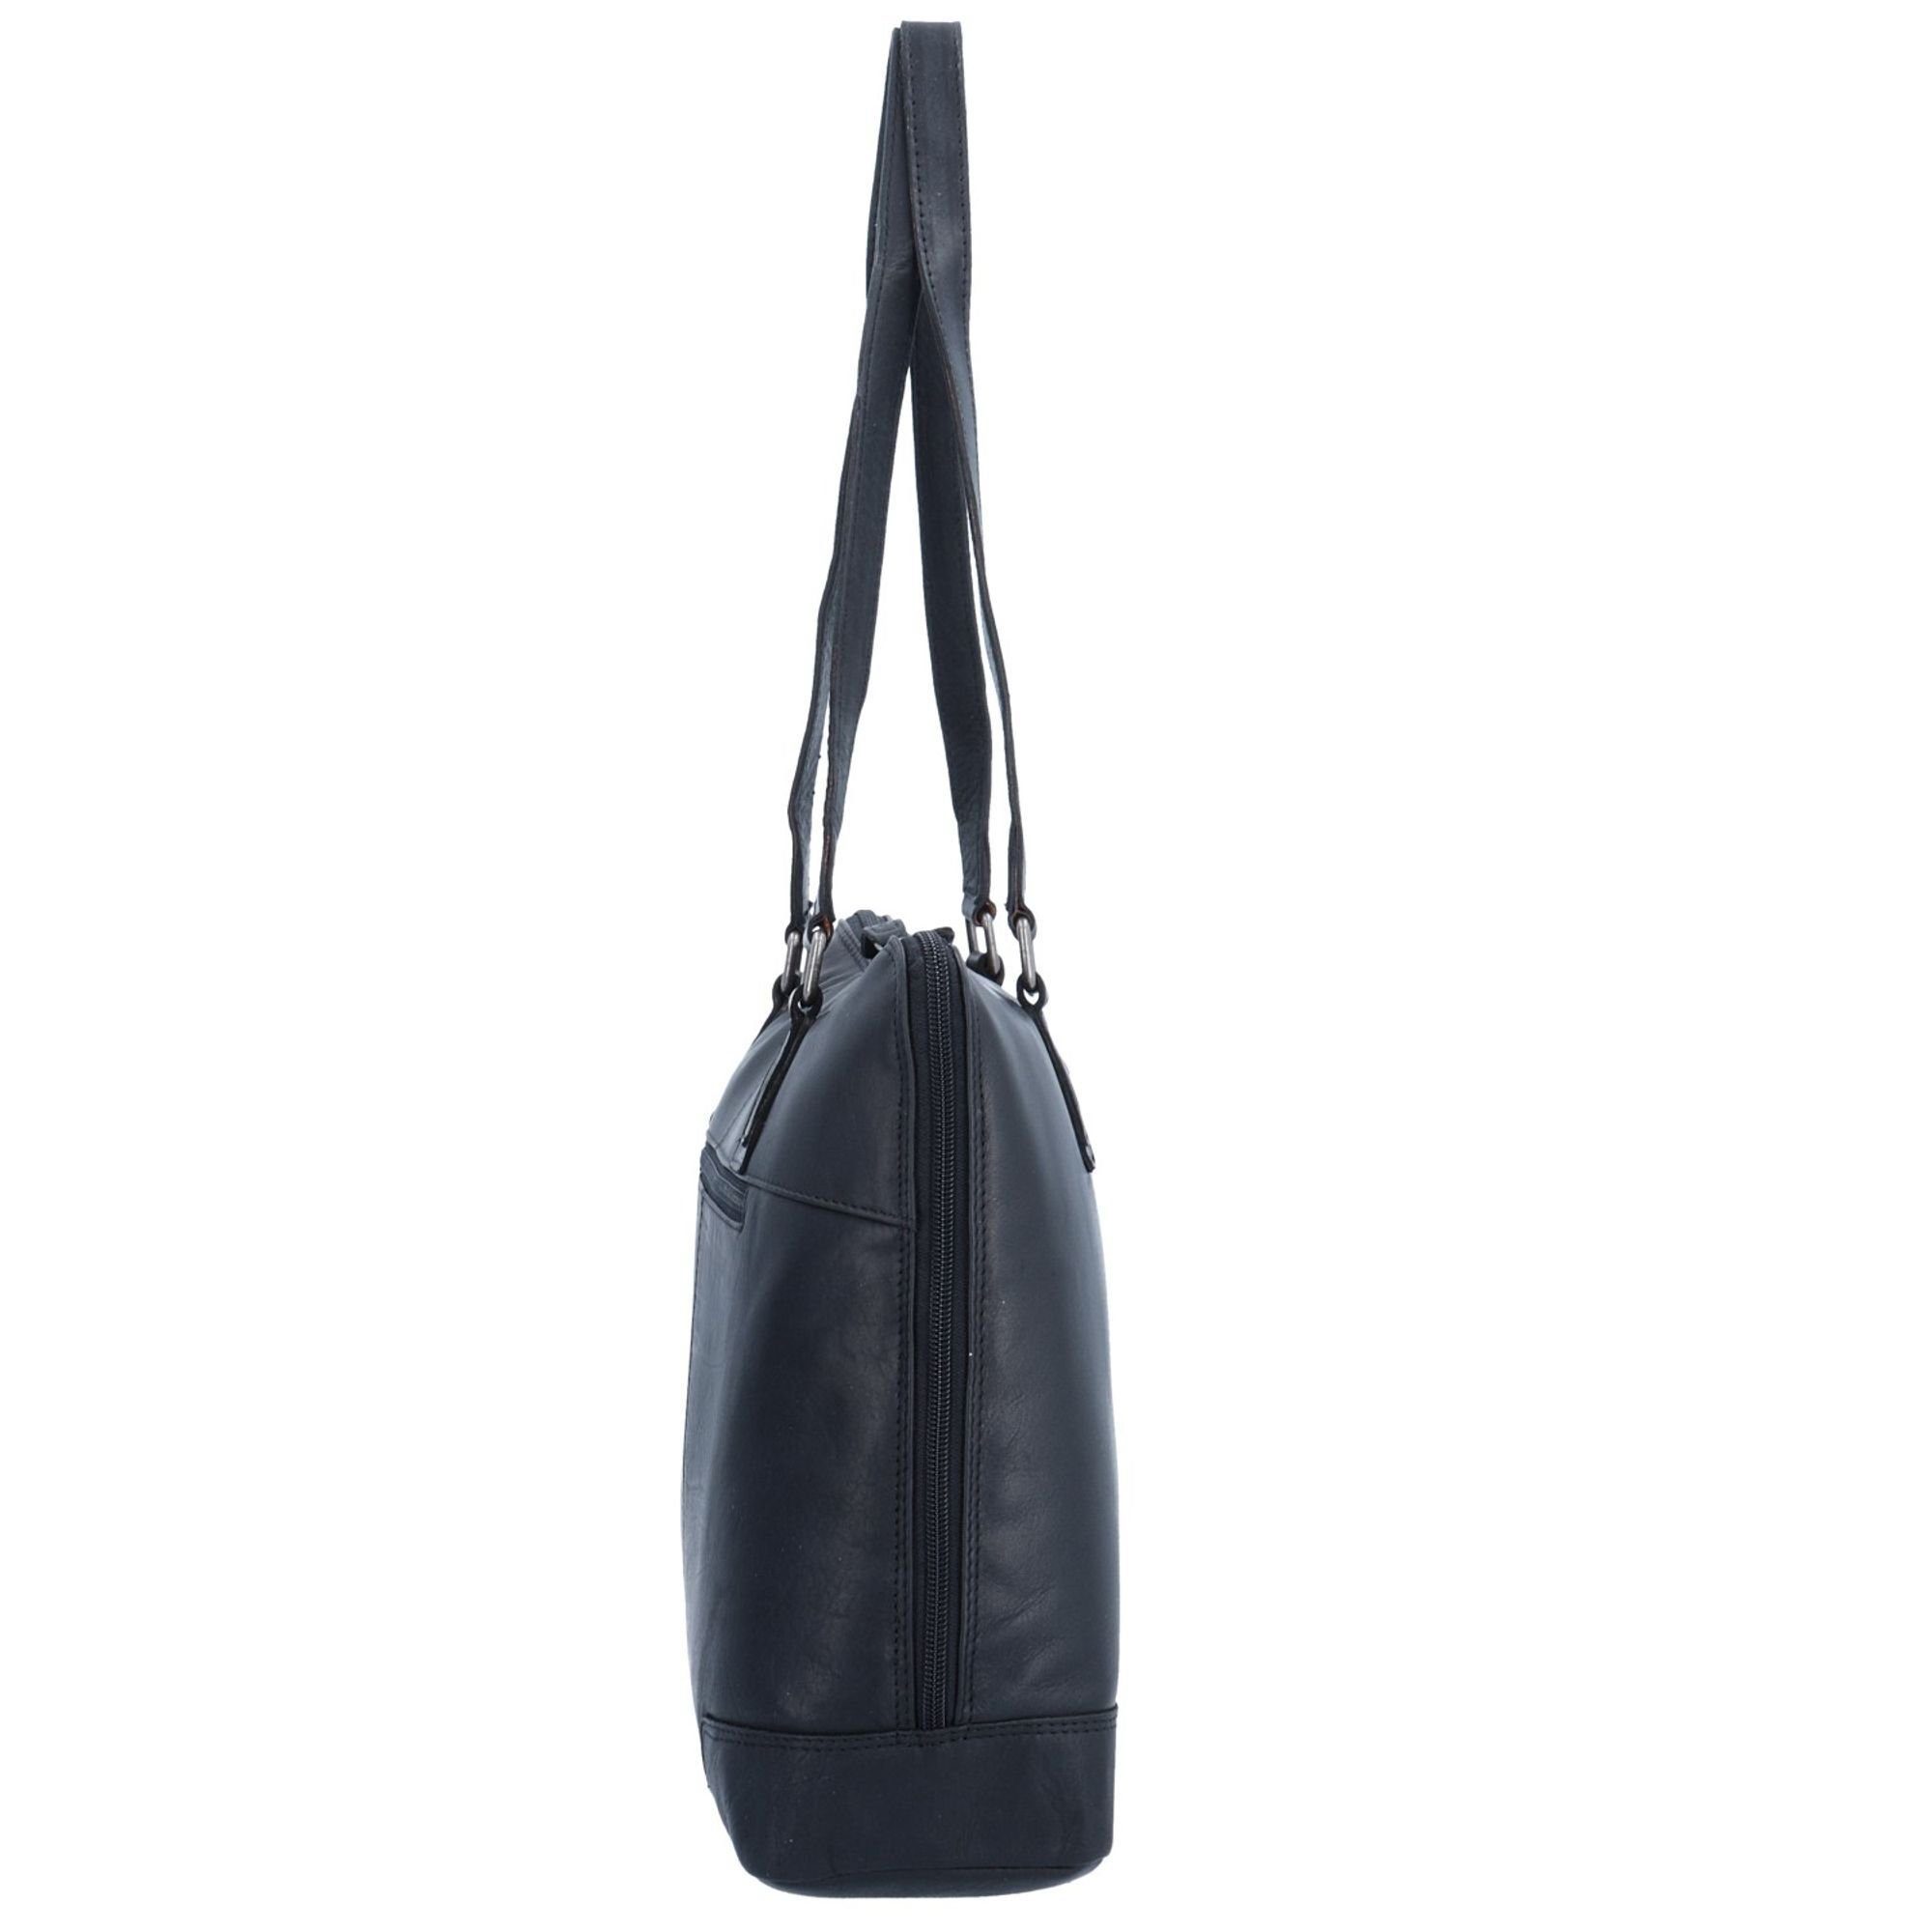 The Wax black Up, Leder Chesterfield Brand Schultertasche Pull